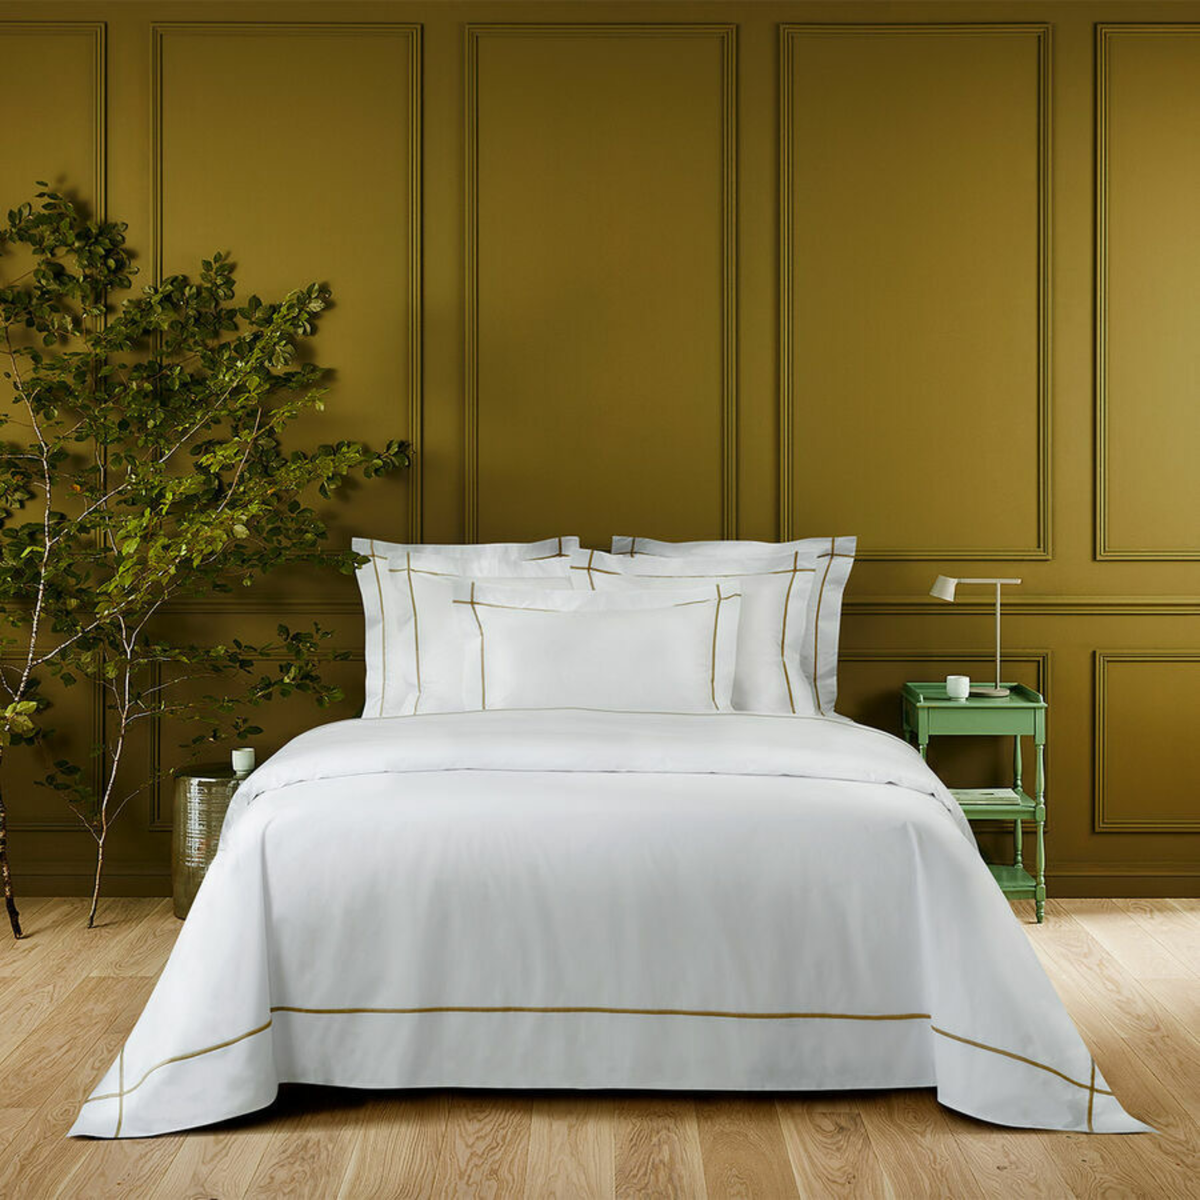 Full Bed Dressed in Yves Delorme Athena Bedding in Bronze Color